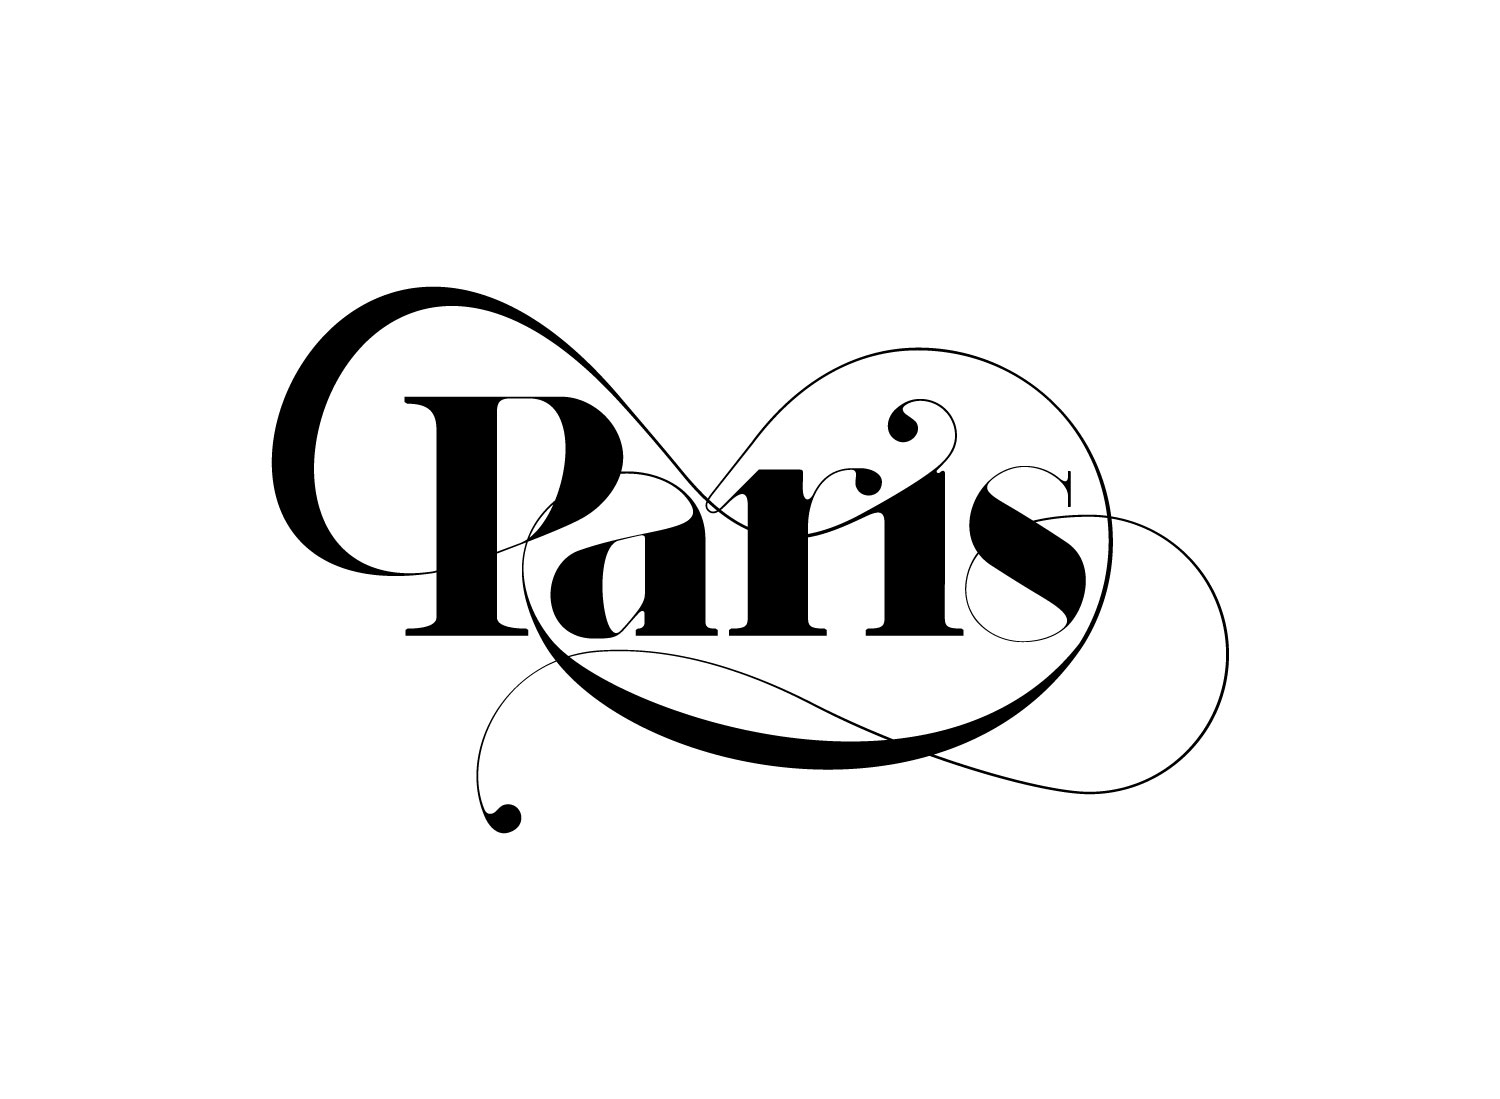 I love Typography, Paris Typography, custom fonts, vogue fonts, sexy fonts, Moshik Nadav, Paris Pro numbers, Paris Pro Typeface, Vogue numbers, Fashion fonts, Type design, Typographer NYC, iconic fonts, best fashion fonts, Paris typeface, cutting edge fonts, Paris logo, swashes, sweet typography